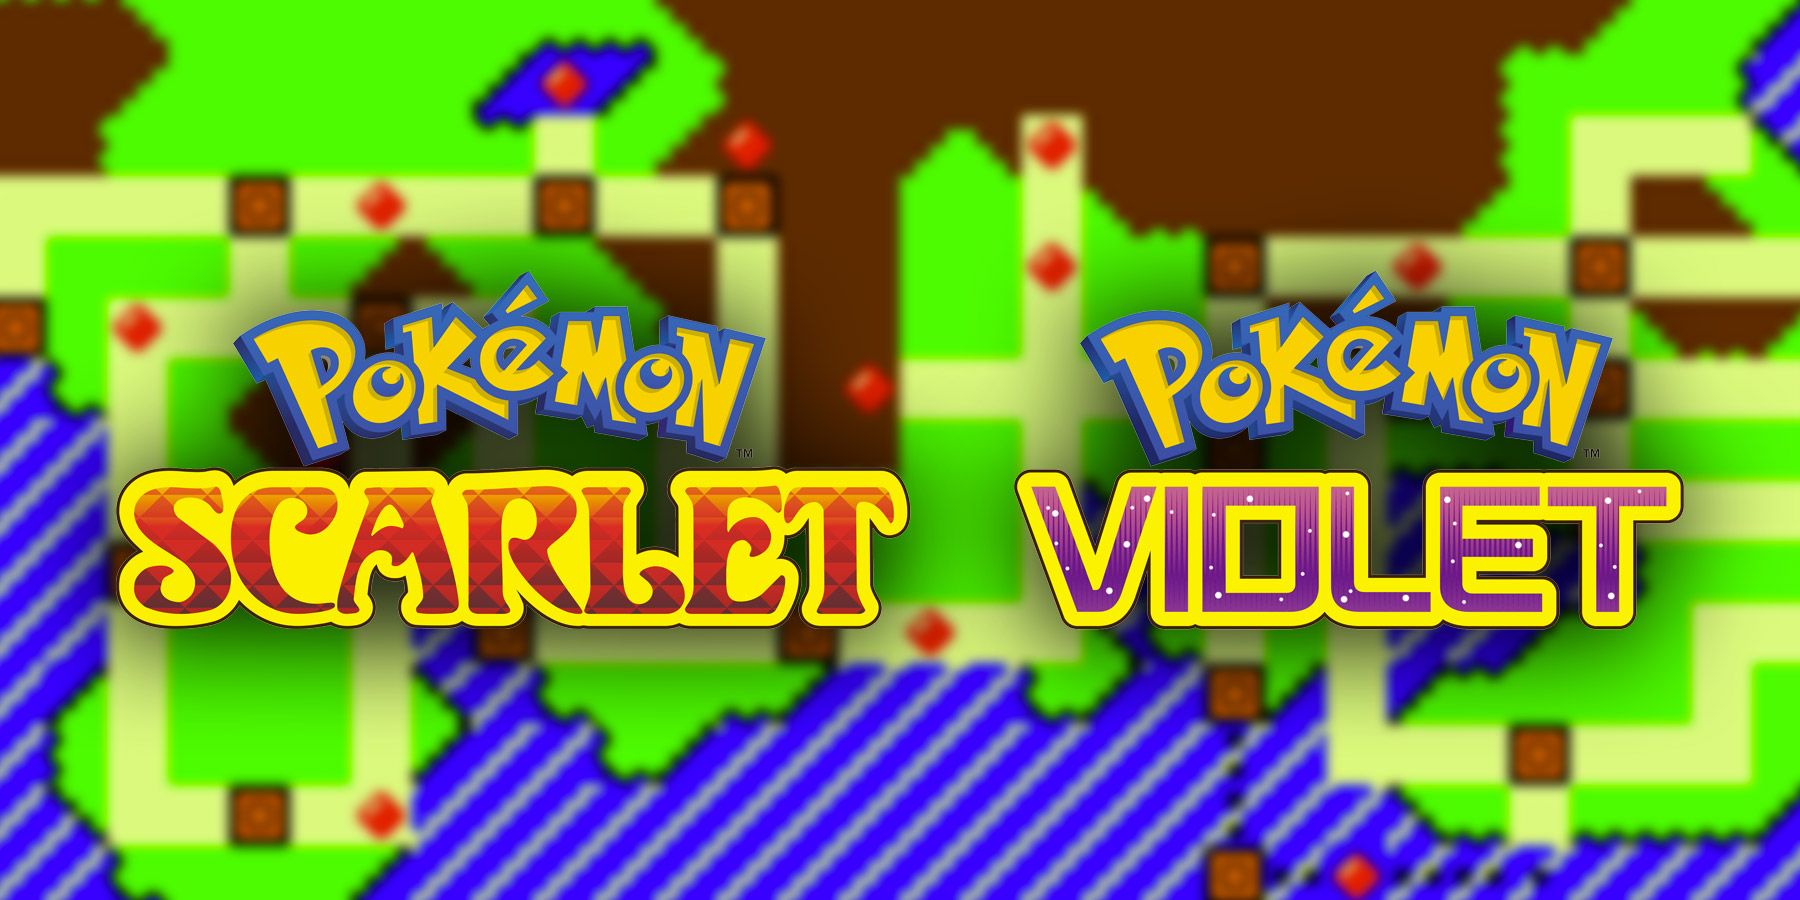 What's Inside: Pokemon Scarlet And Violet DLC – COMICON